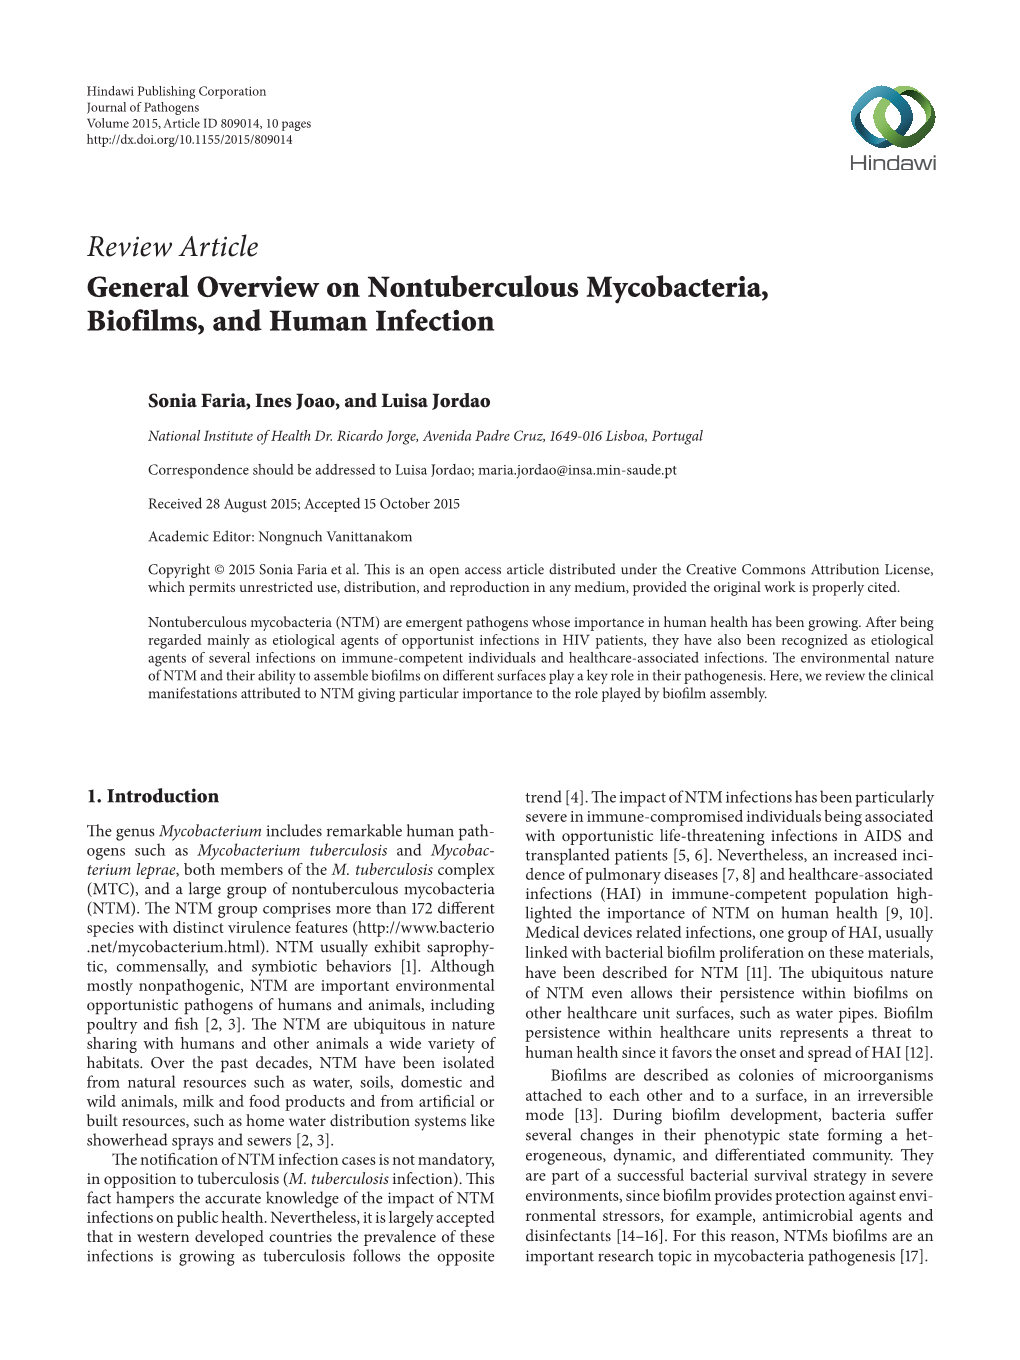 Review Article General Overview on Nontuberculous Mycobacteria, Biofilms, and Human Infection